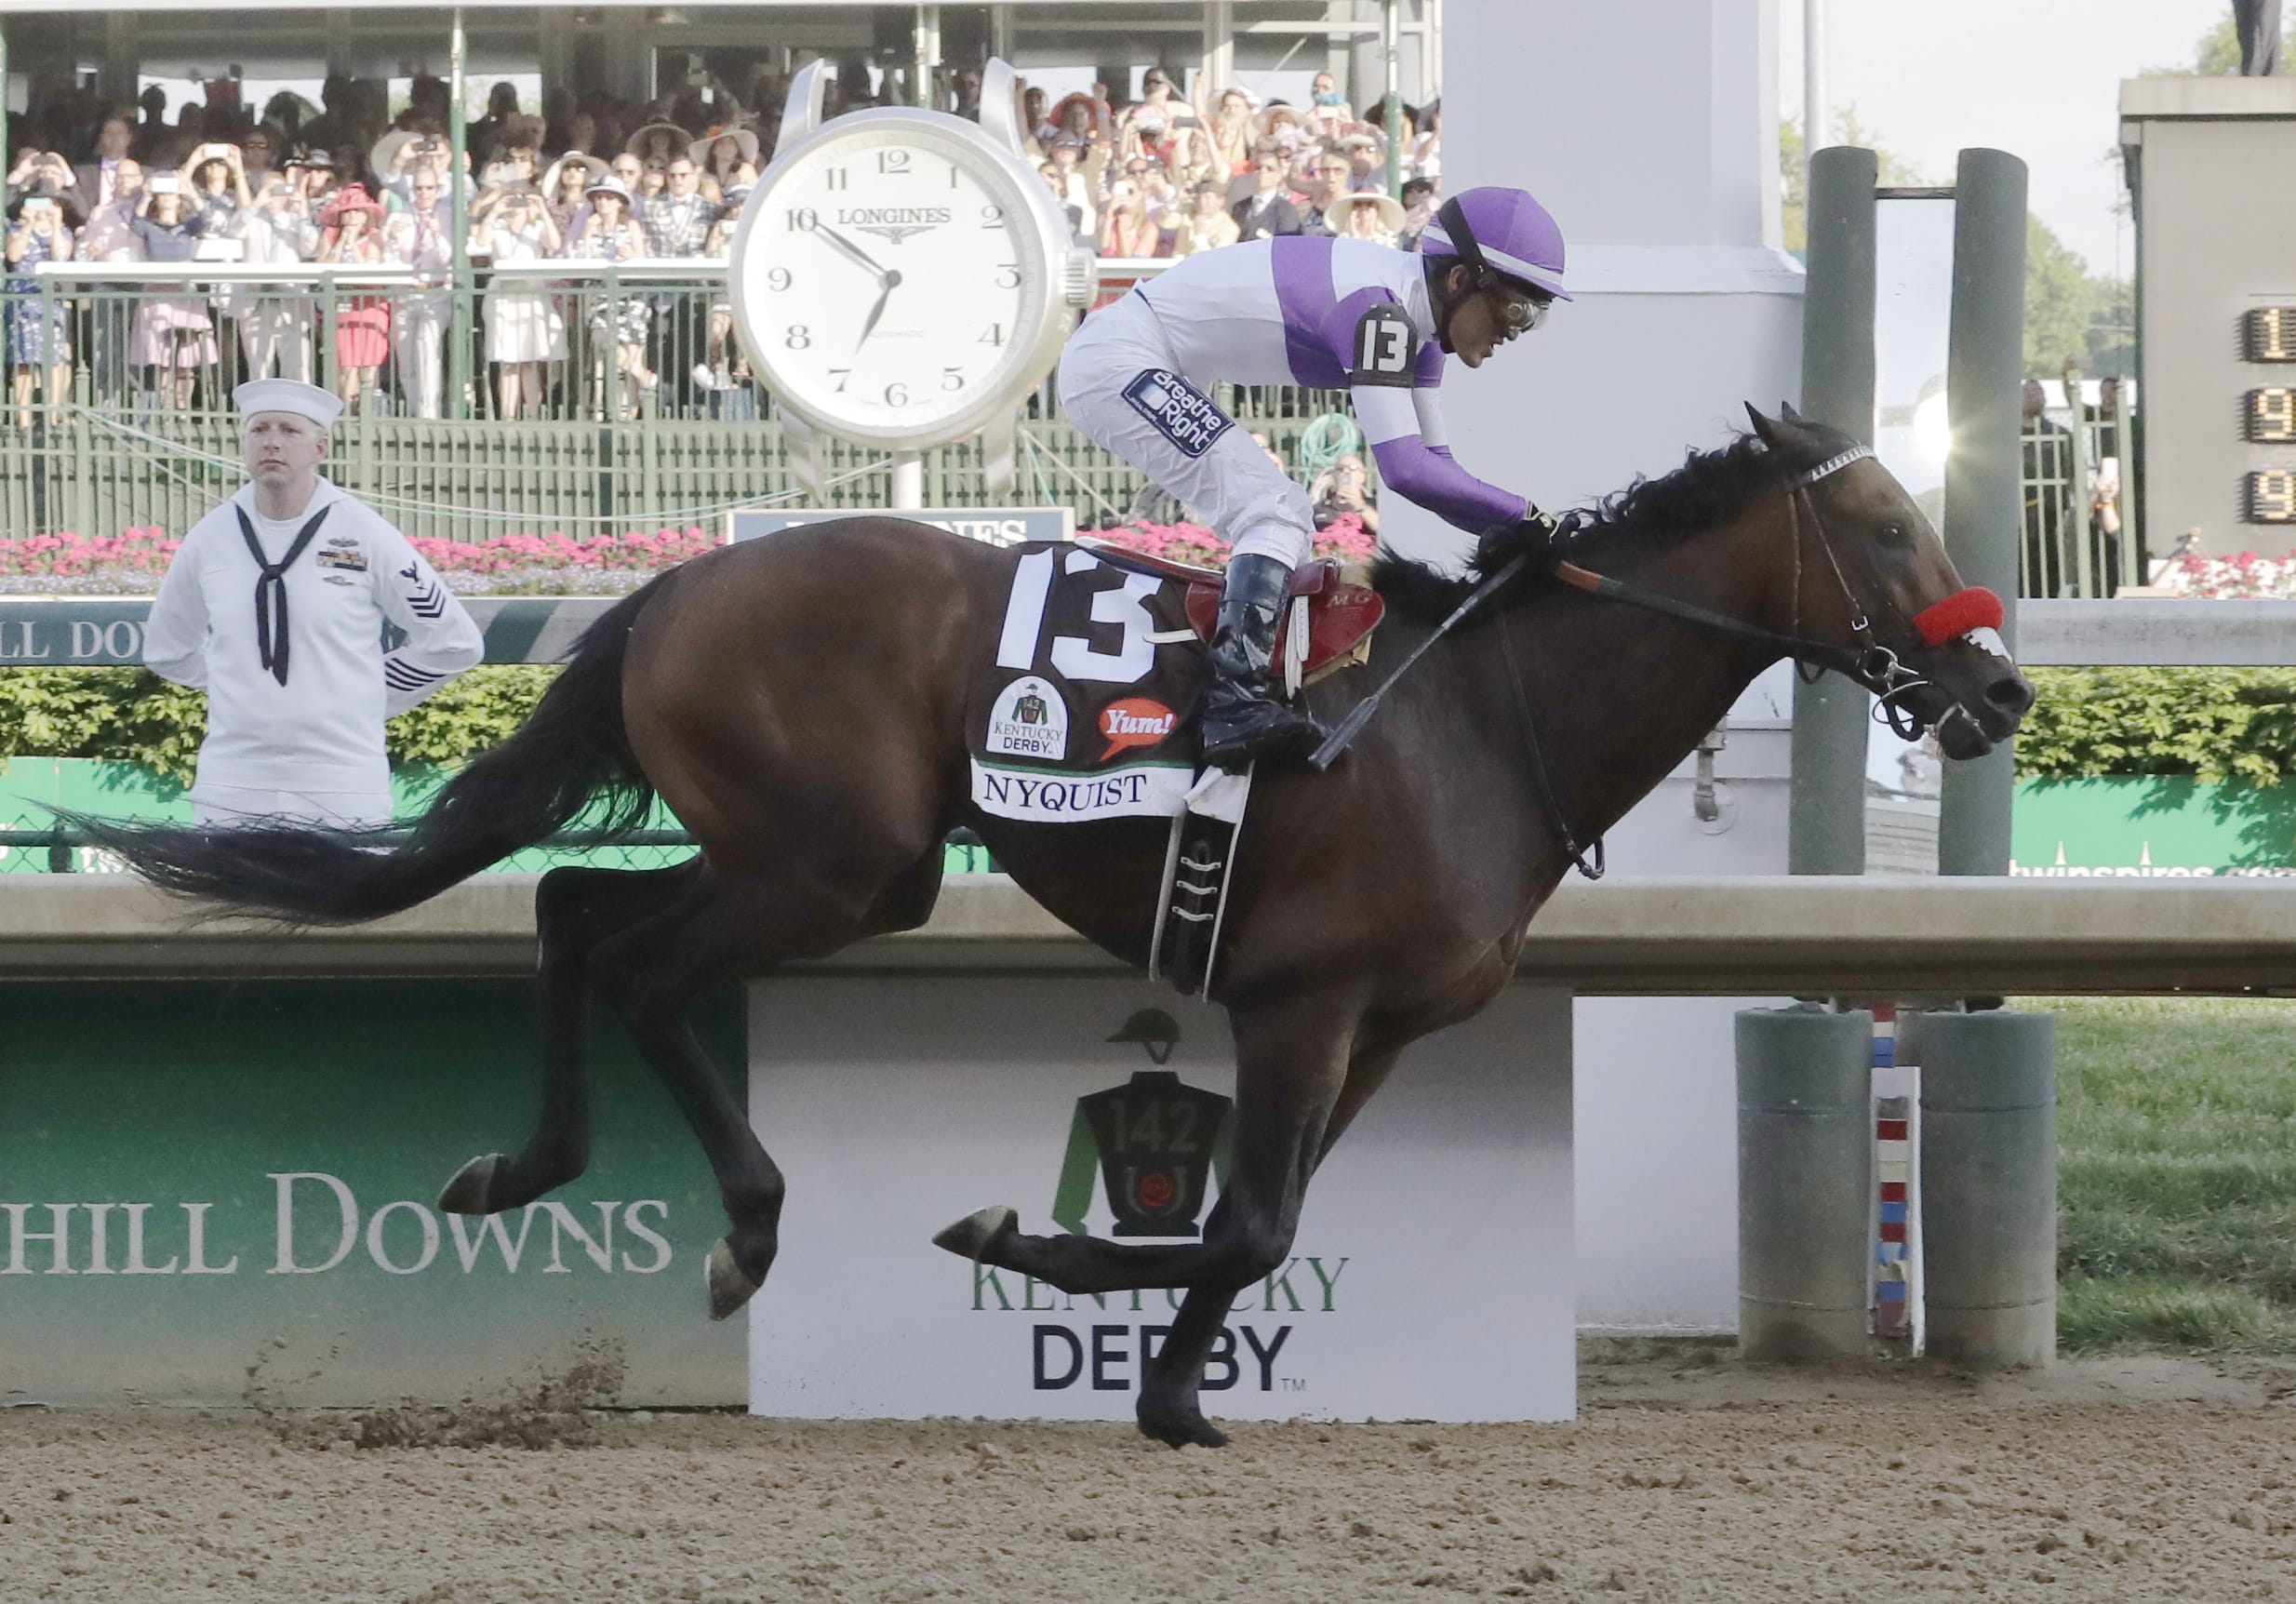 Mario Guitierrez rides Nyquist to victory during the 142nd running of the Kentucky Derby horse race at Churchill Downs Saturday, May 7, 2016, in Louisville, Ky.